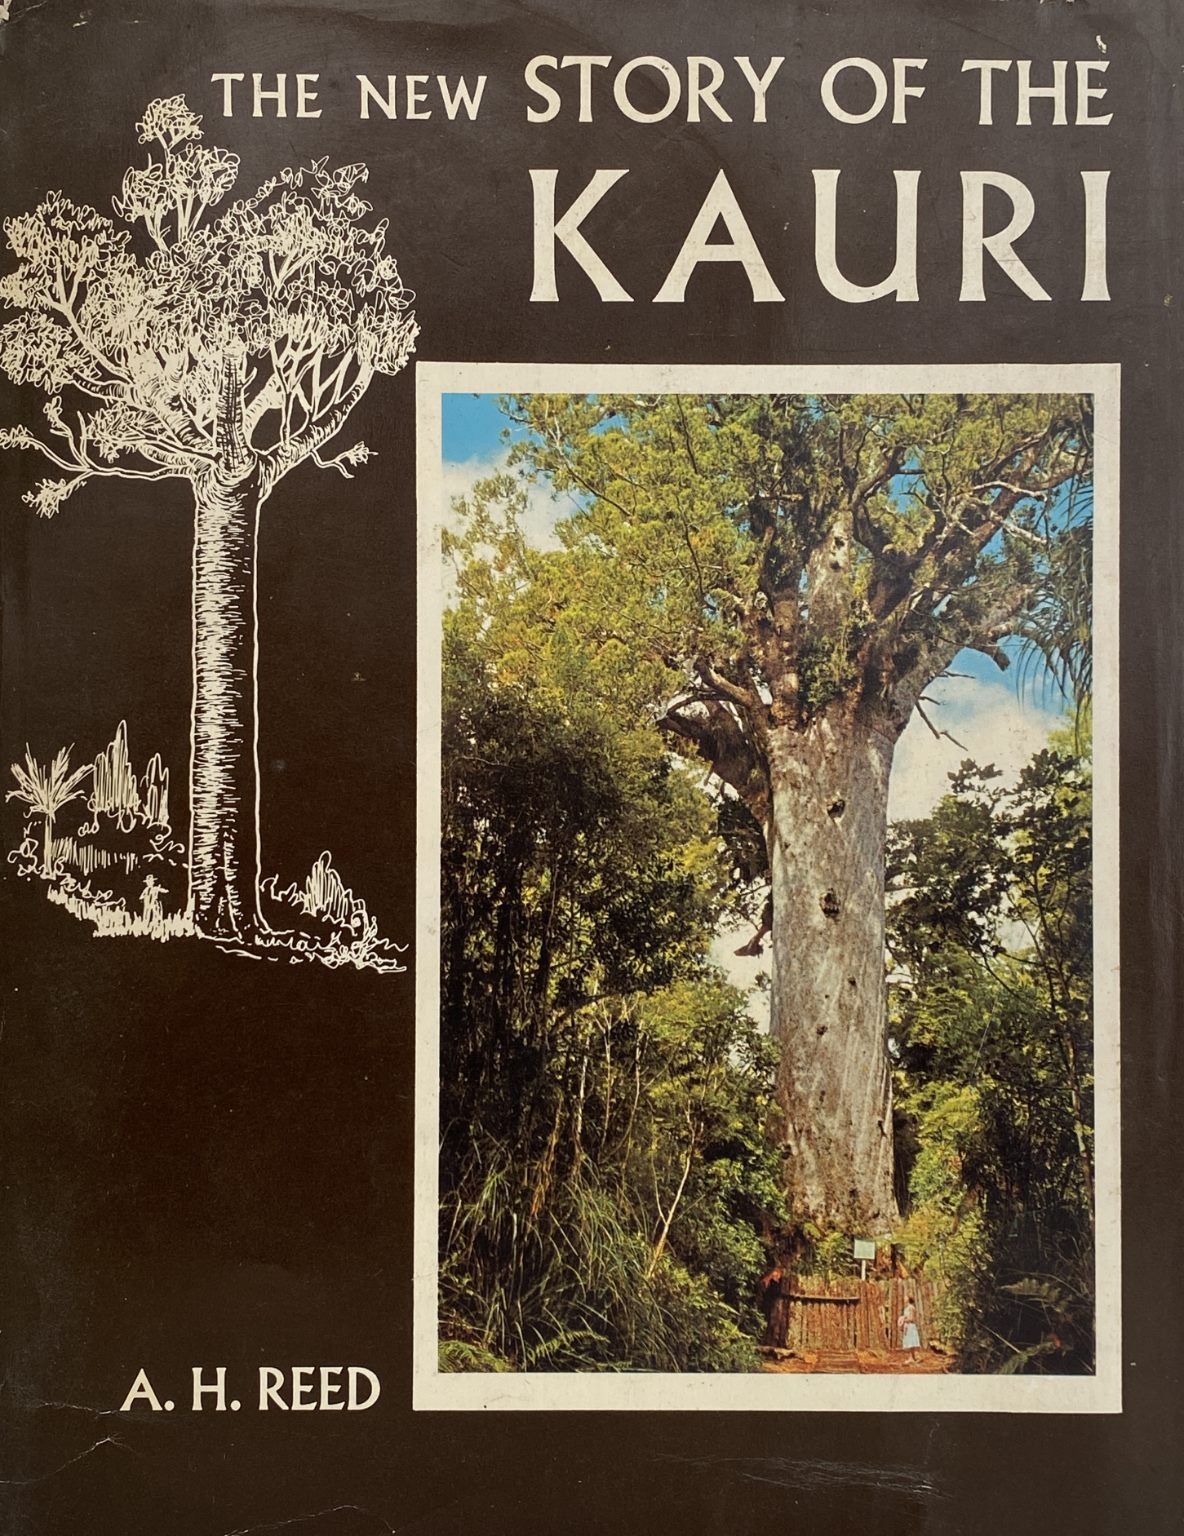 THE NEW STORY OF THE KAURI